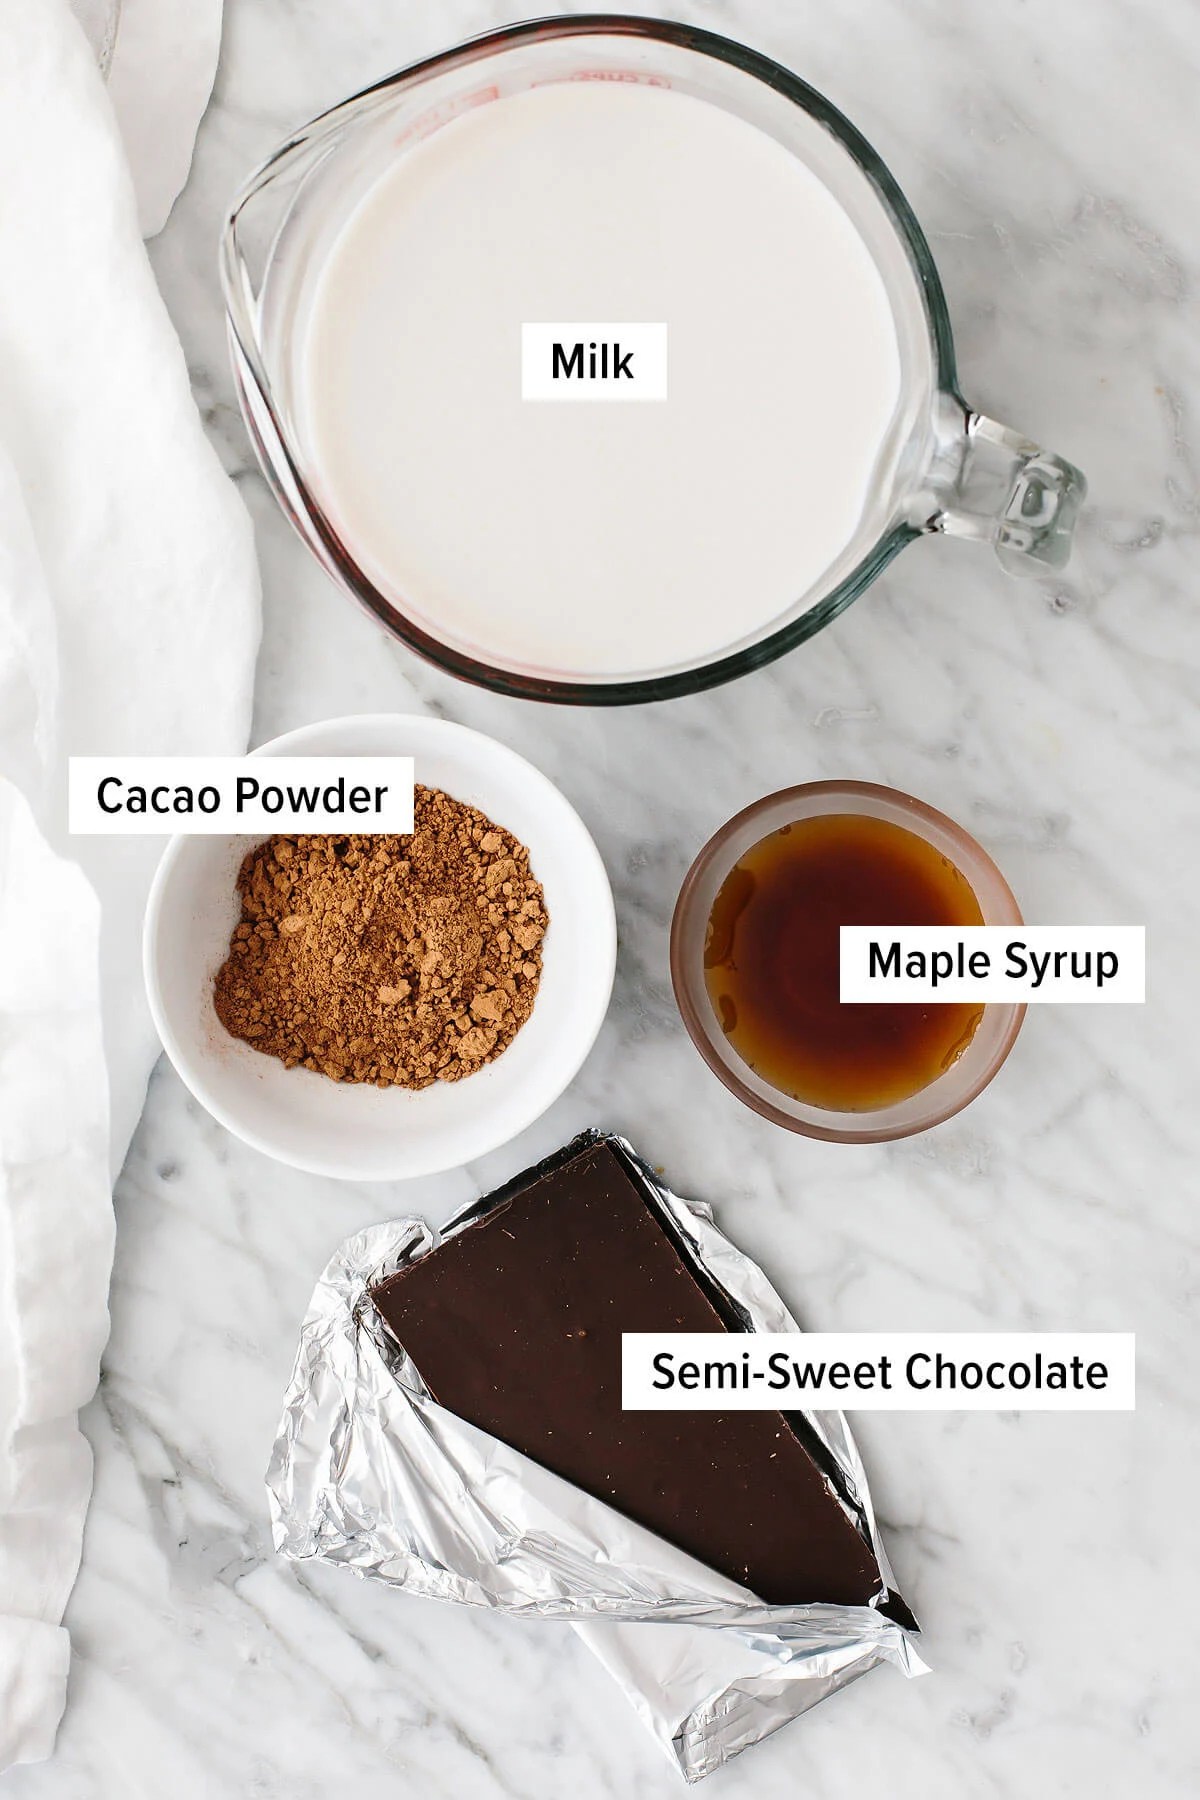 Ingredients for hot chocolate on a table.